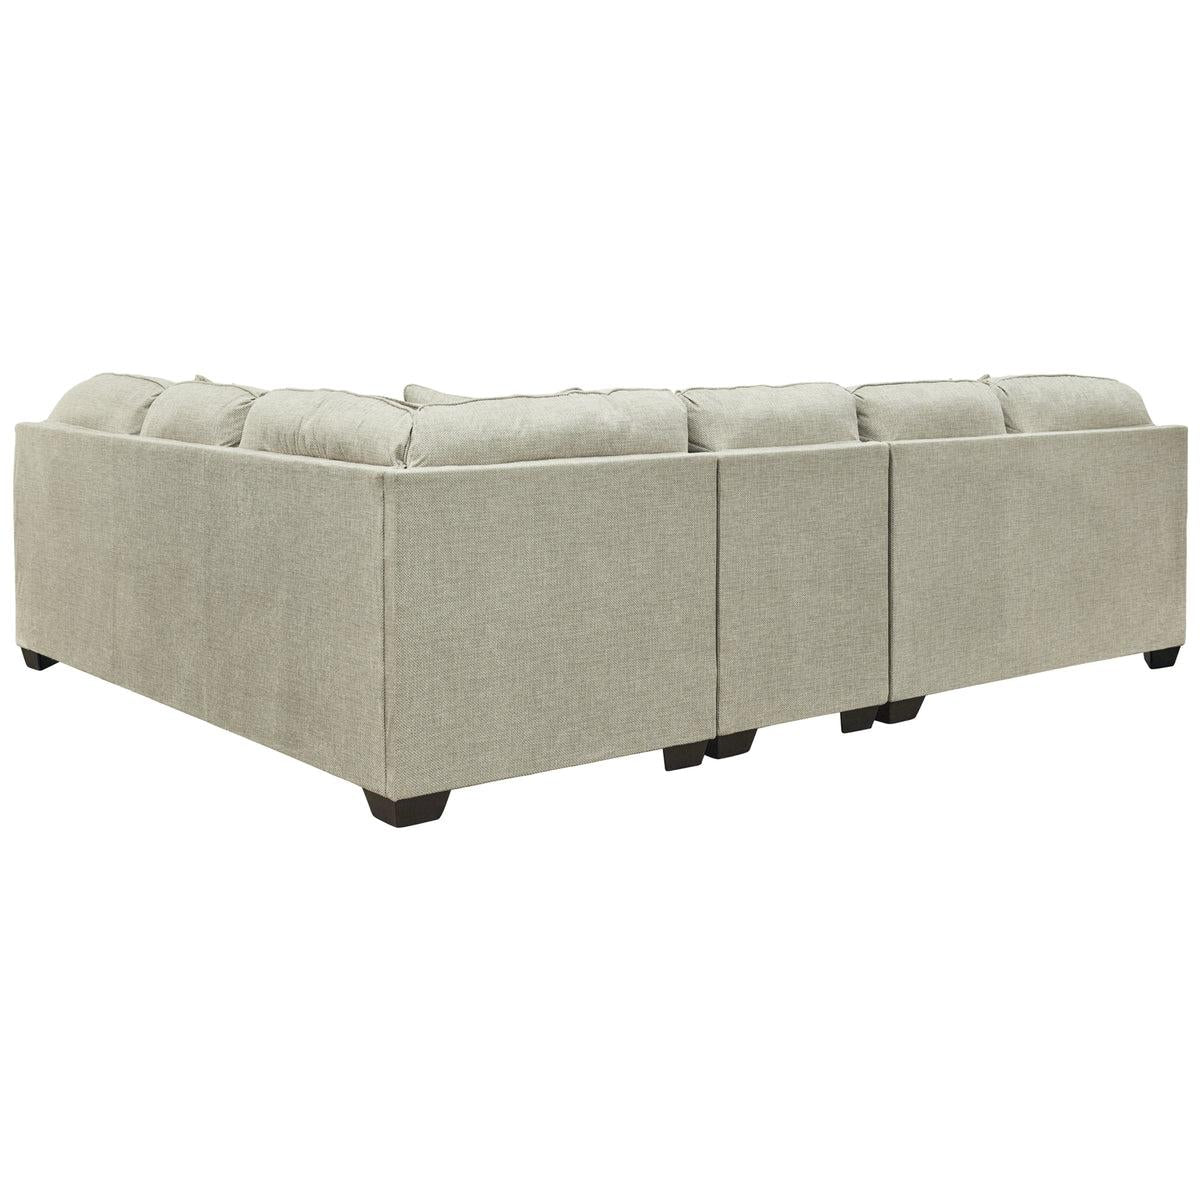 Wellhaven Sectional Sofa-Sectional Sofas-Jennifer Furniture